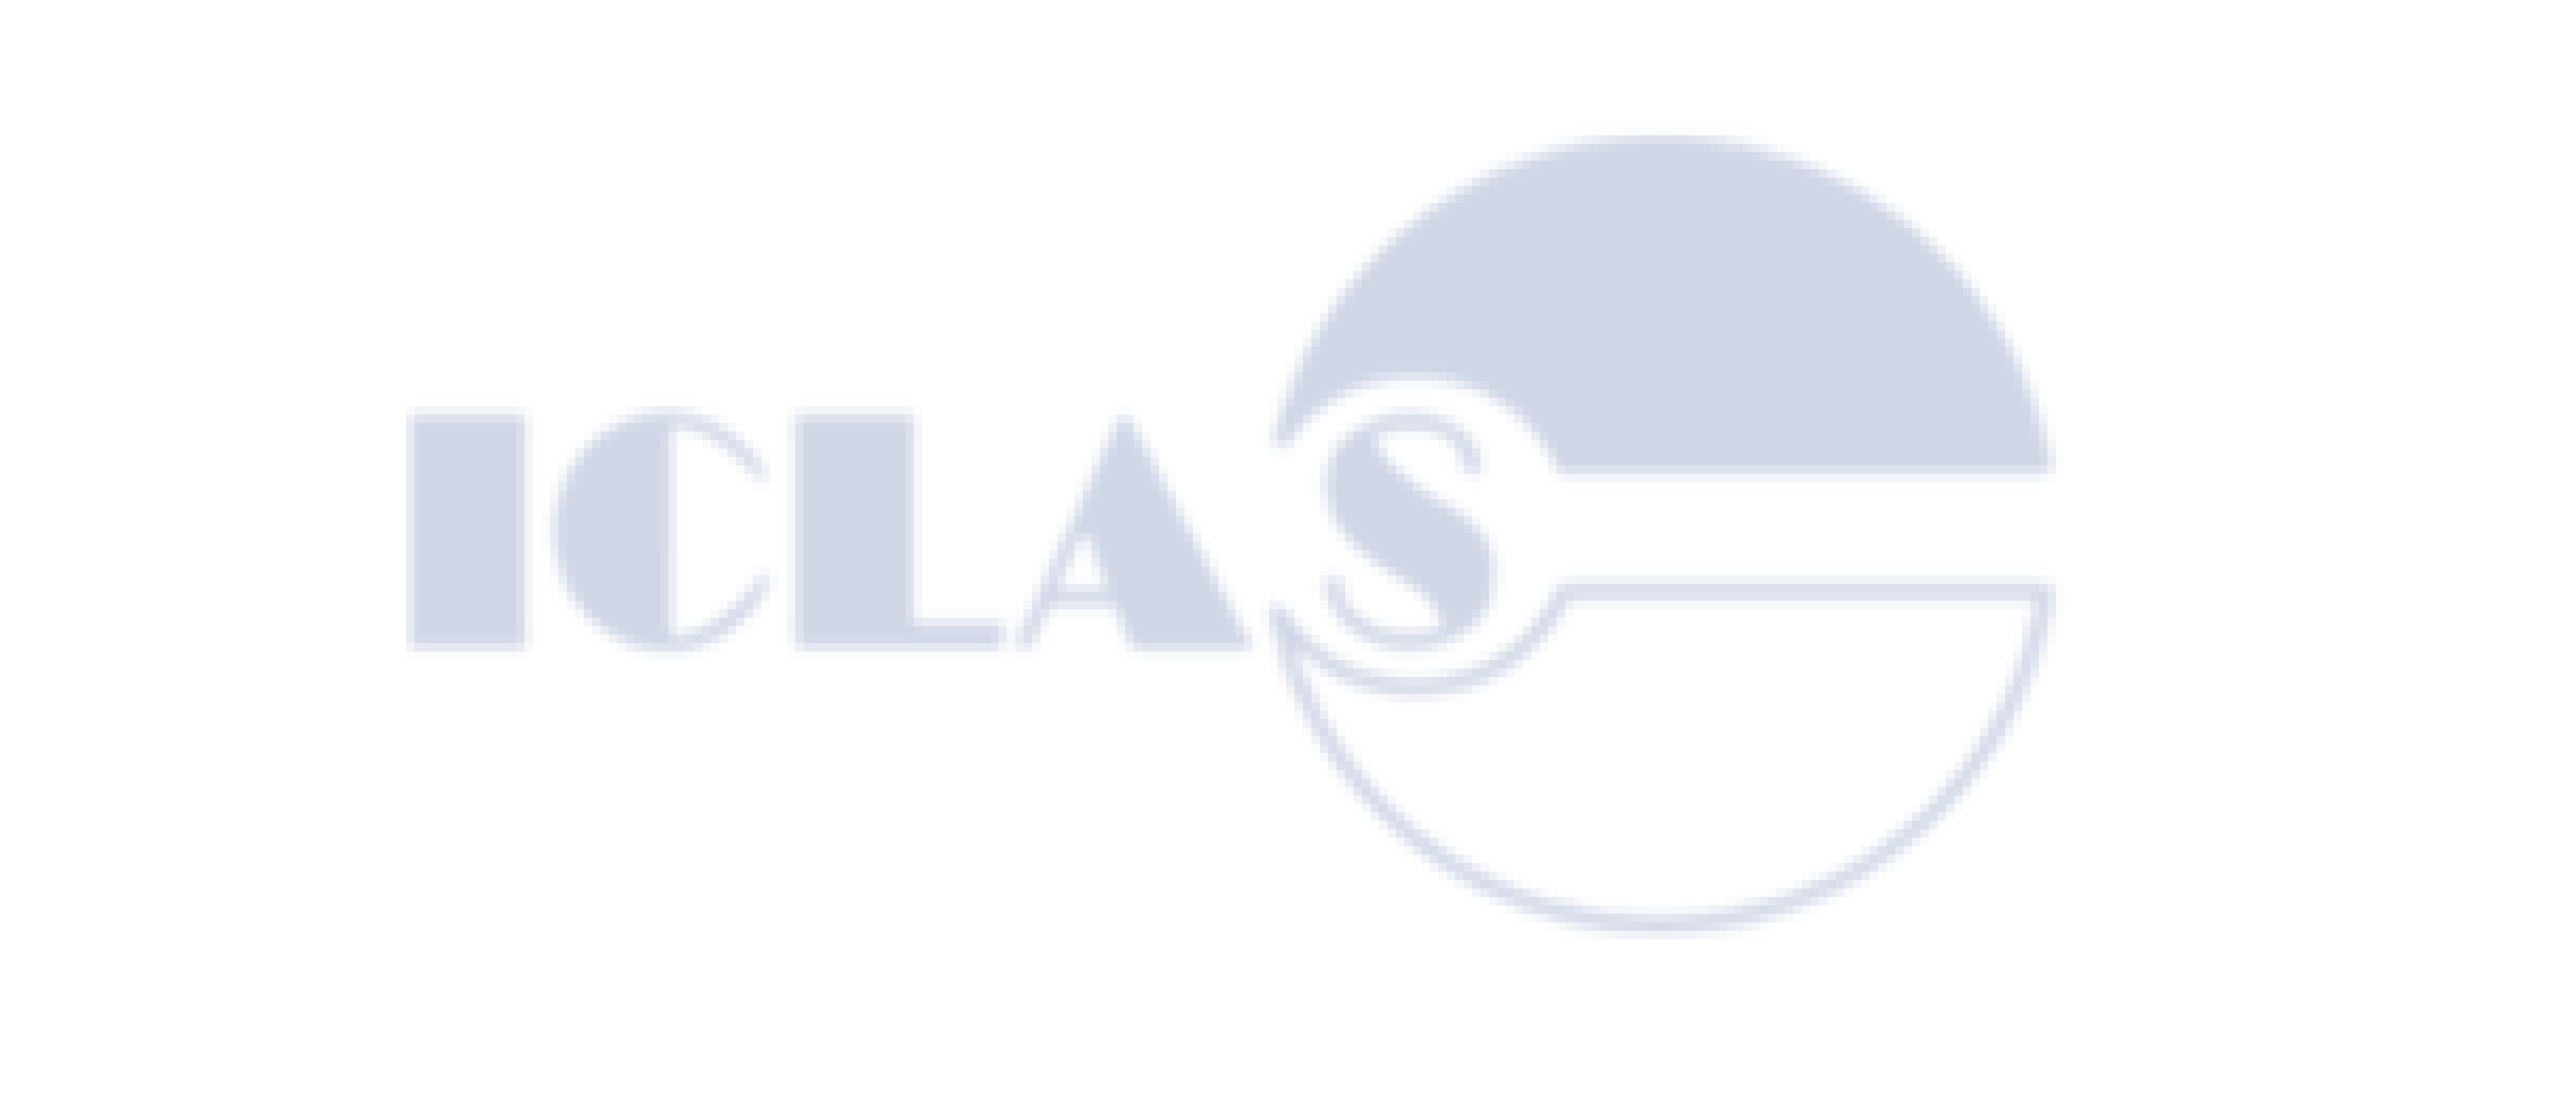 ICLAS LAQ Network for the Promotion of Animal Quality in Research